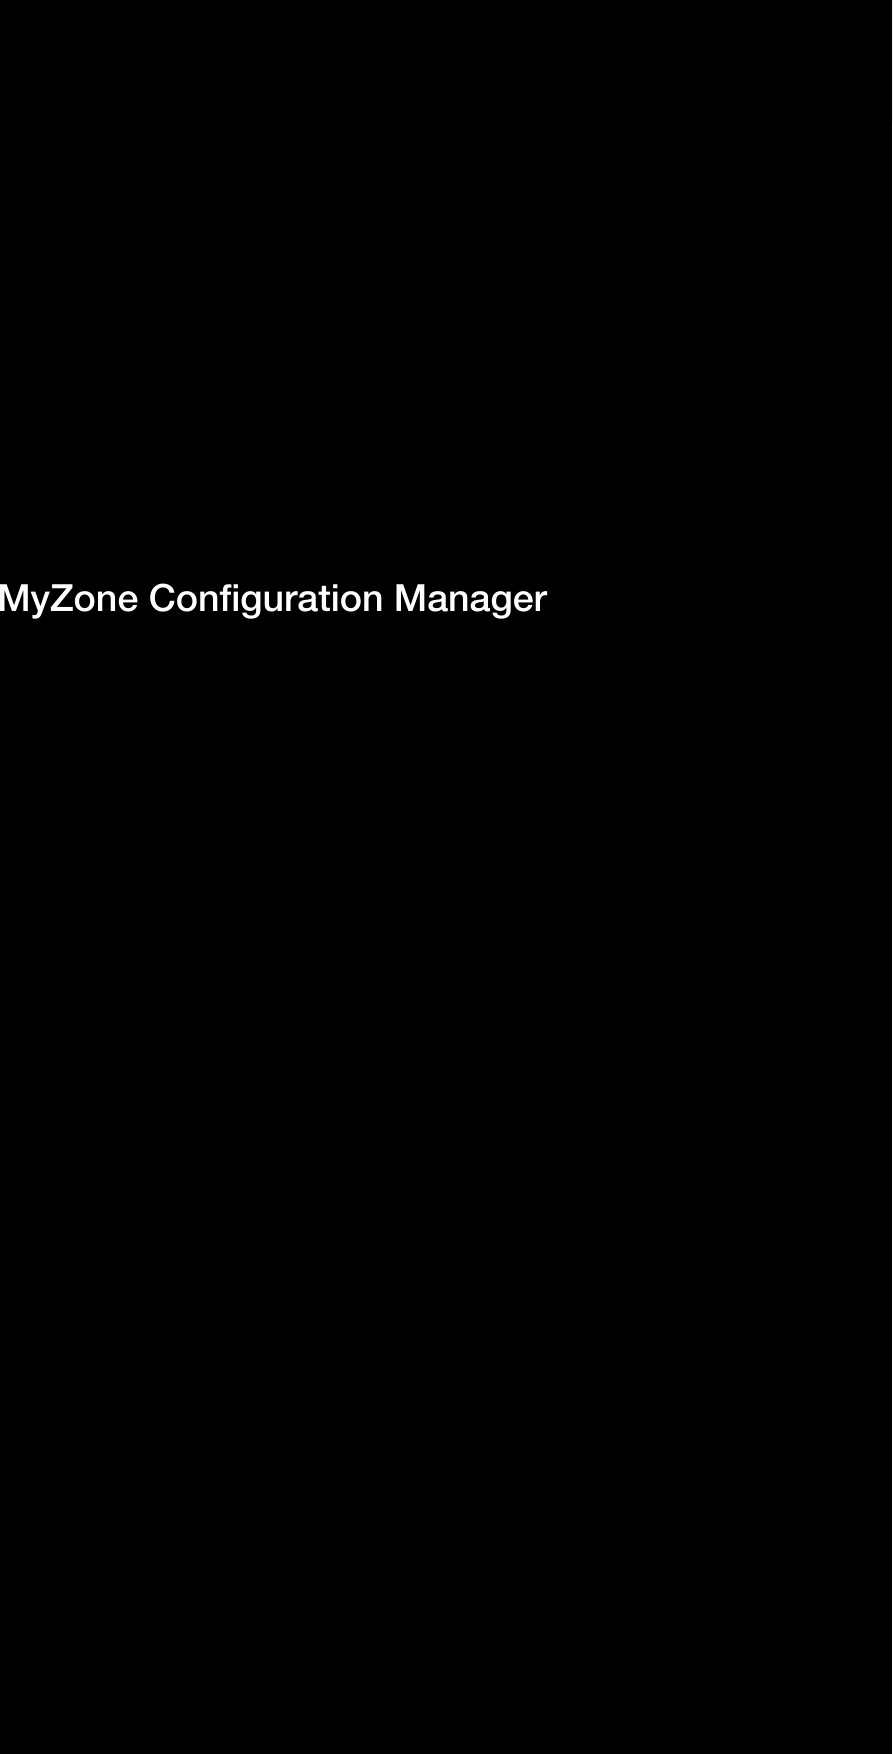 MyZone Conguration Manager